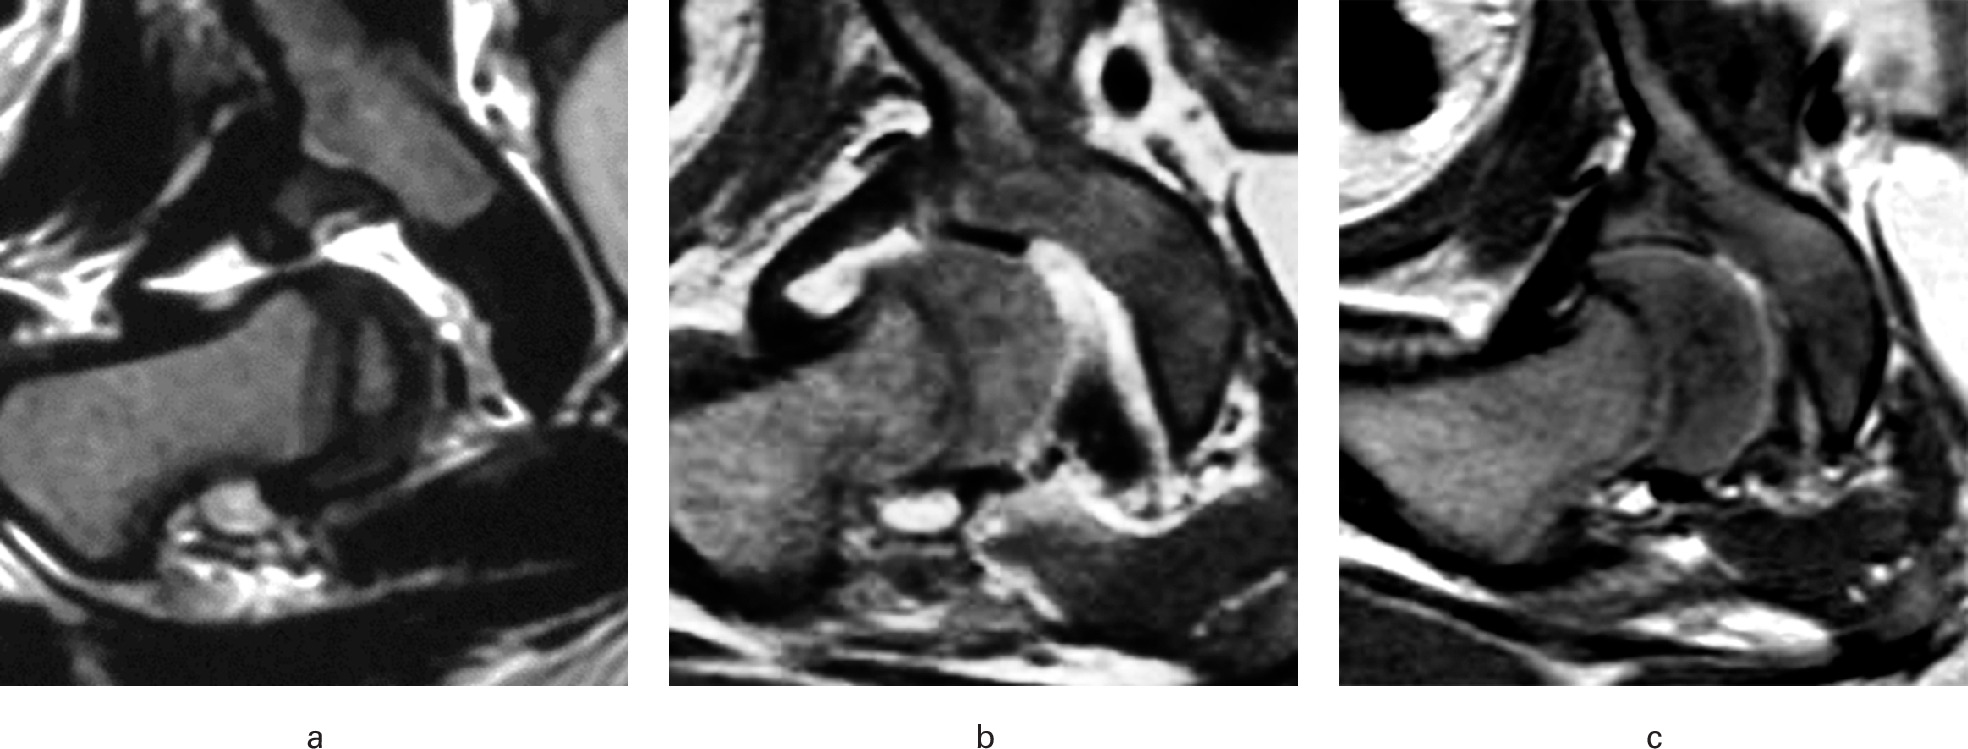 Fig. 3 
            Labrum-acetabular cartilage complex (LACC) morphology (except inverted type) on MRI scans immediately after initial reduction. a) Everted LACC: the cartilage was everted without inverted labrum. b) Partly inverted LACC: the cartilage was everted with inverted labrum. c) Partly inverted LACC (overriding type): the entire LACC was divided into an inverted part and an everted part.
          